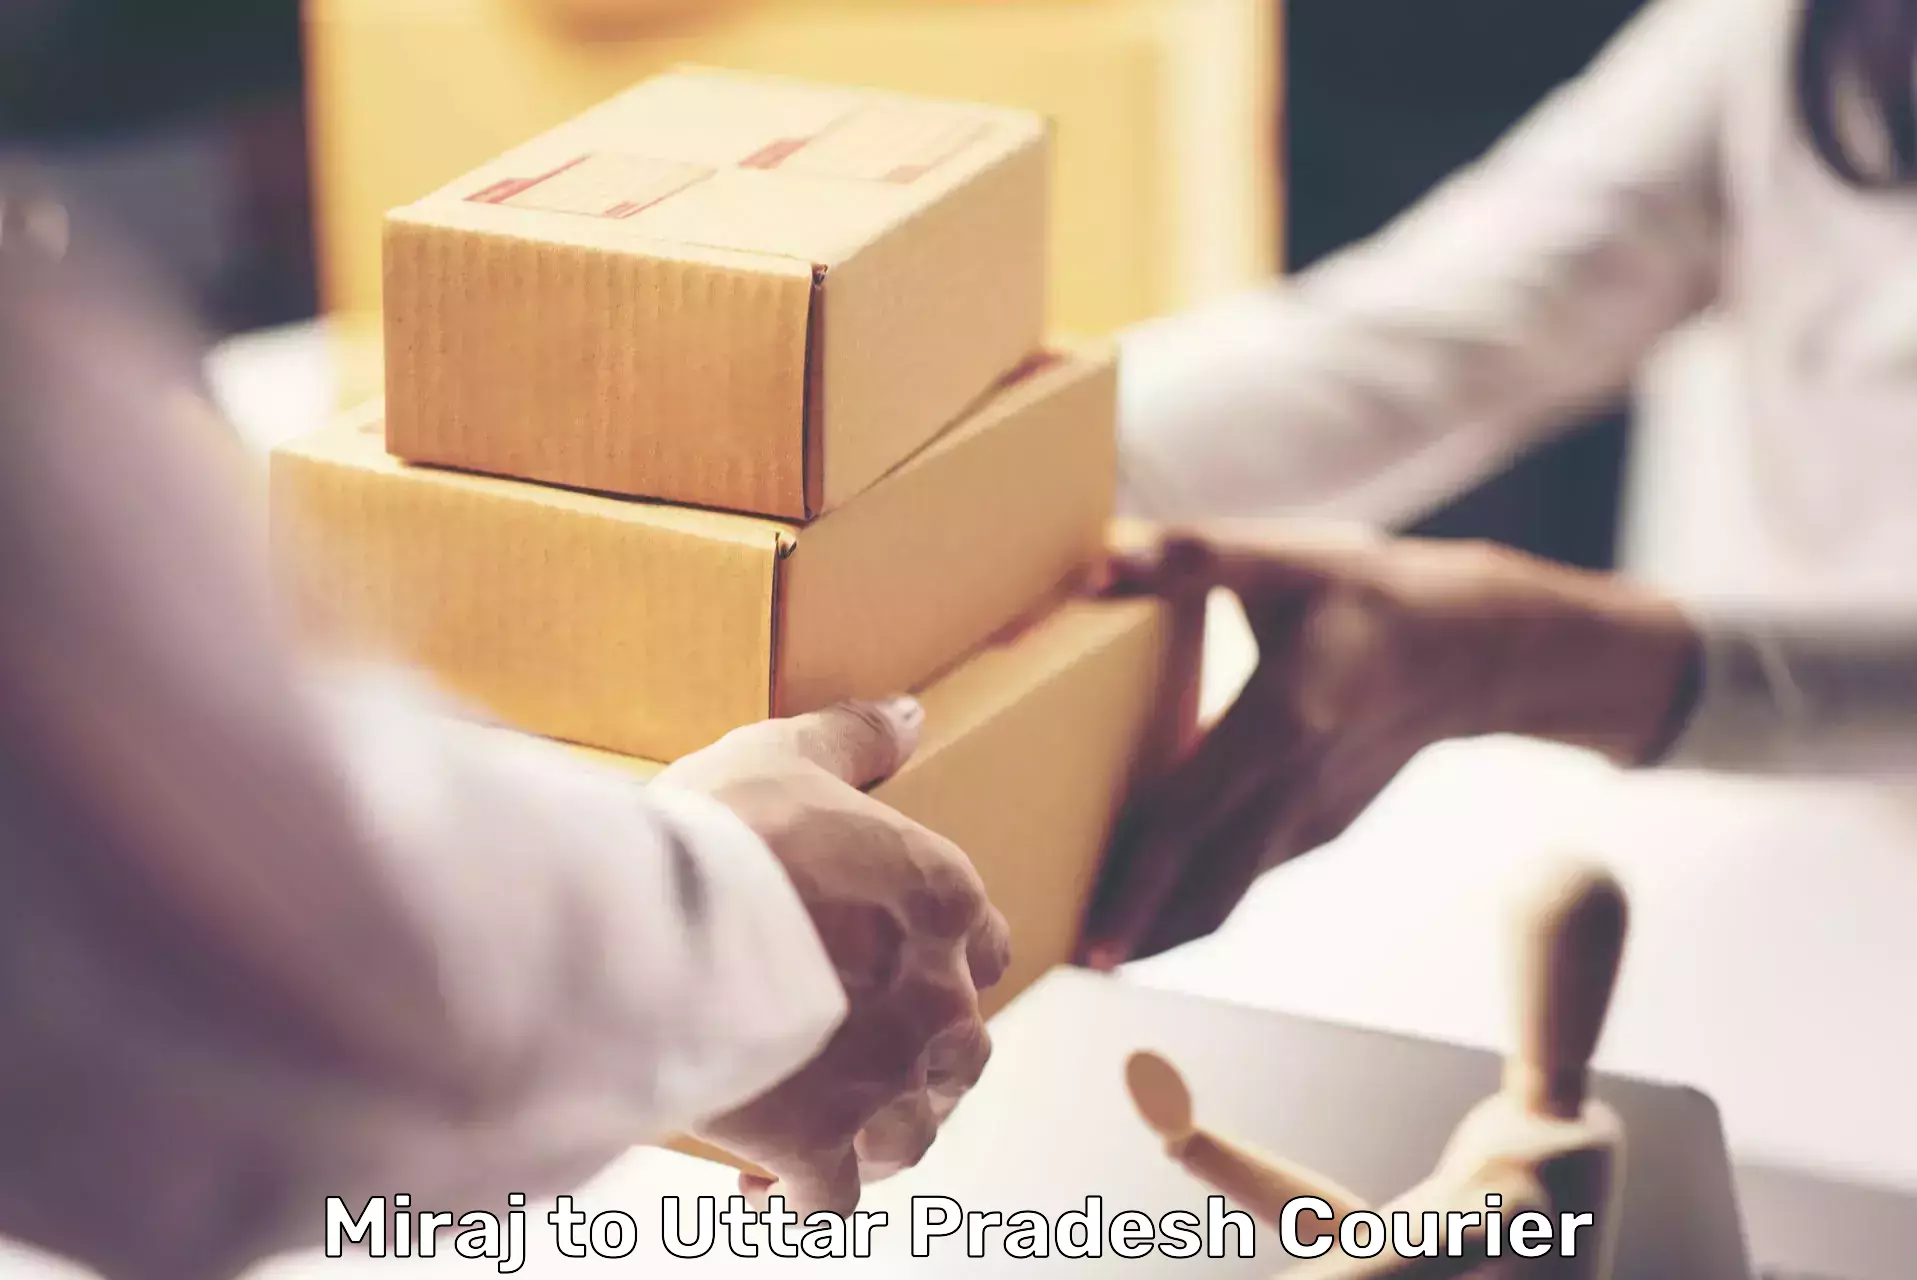 Courier service innovation Miraj to Dostpur